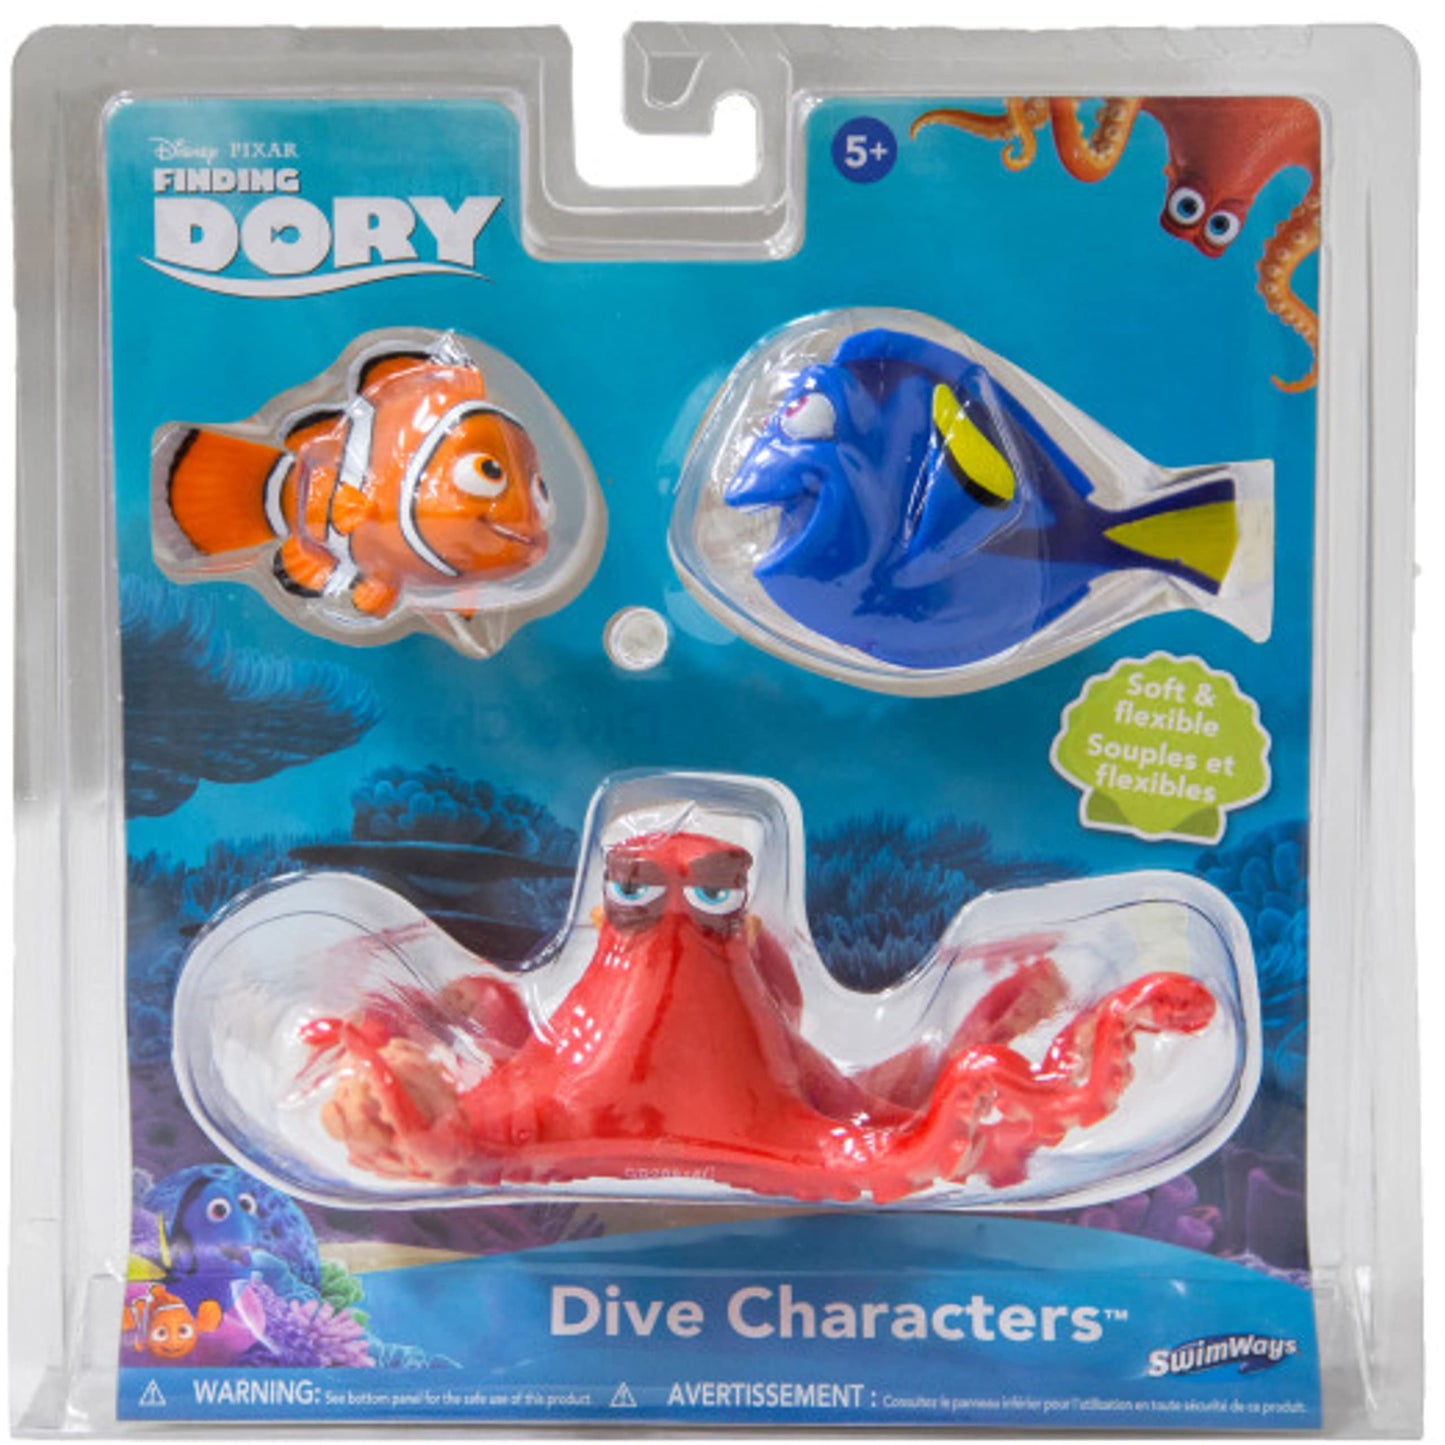 SwimWays Disney Finding Dory Dive Characters Diving Toys (3-Pack), Bath Toys & Pool Party Supplies for Kids Ages 5 and Up